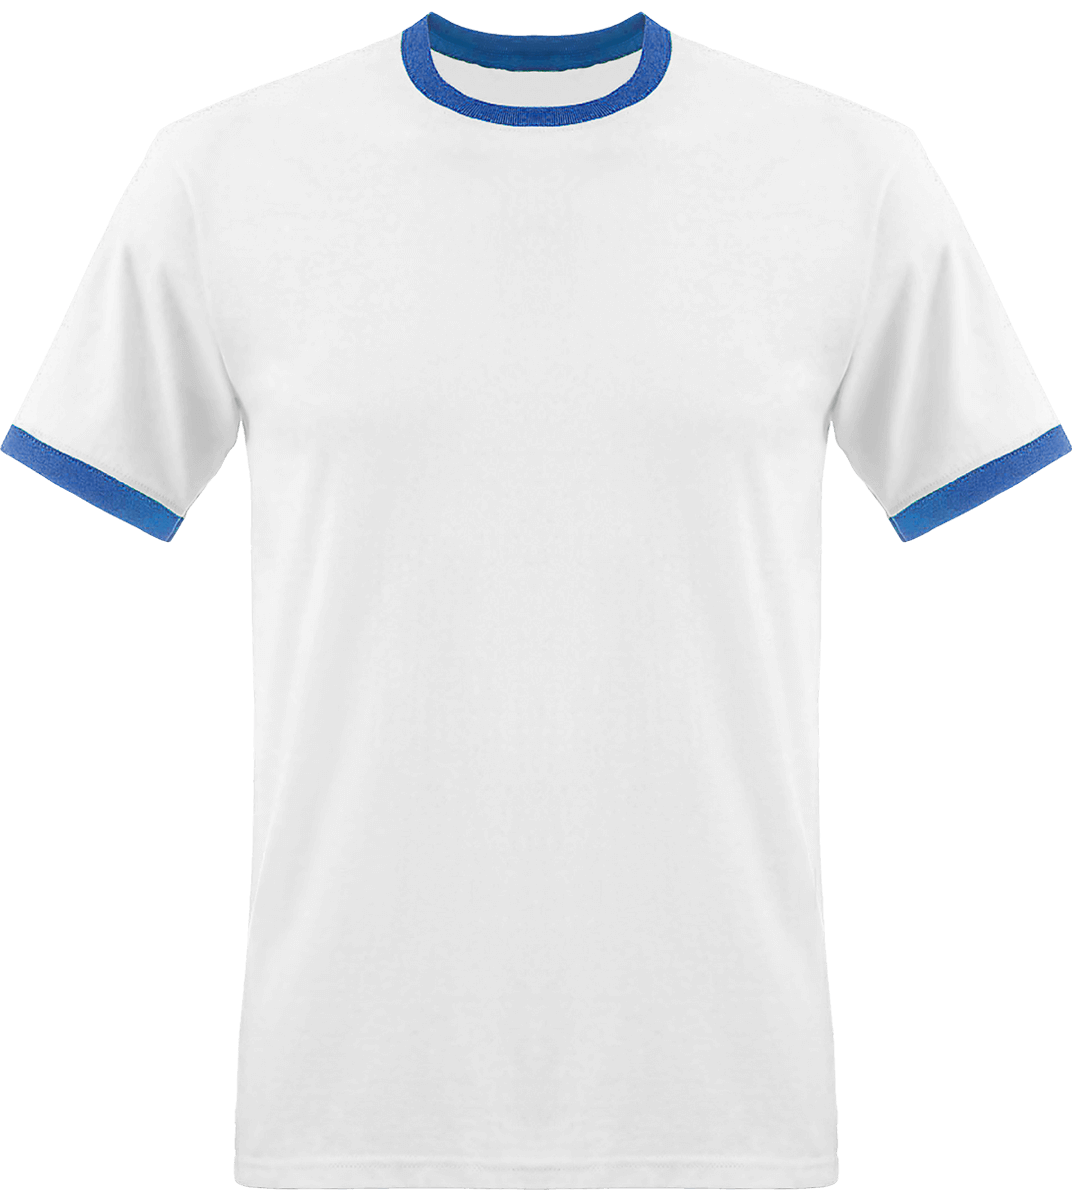 Personalised Tee Shirt Men contrasted stitches | Tunetoo White / Royal Blue